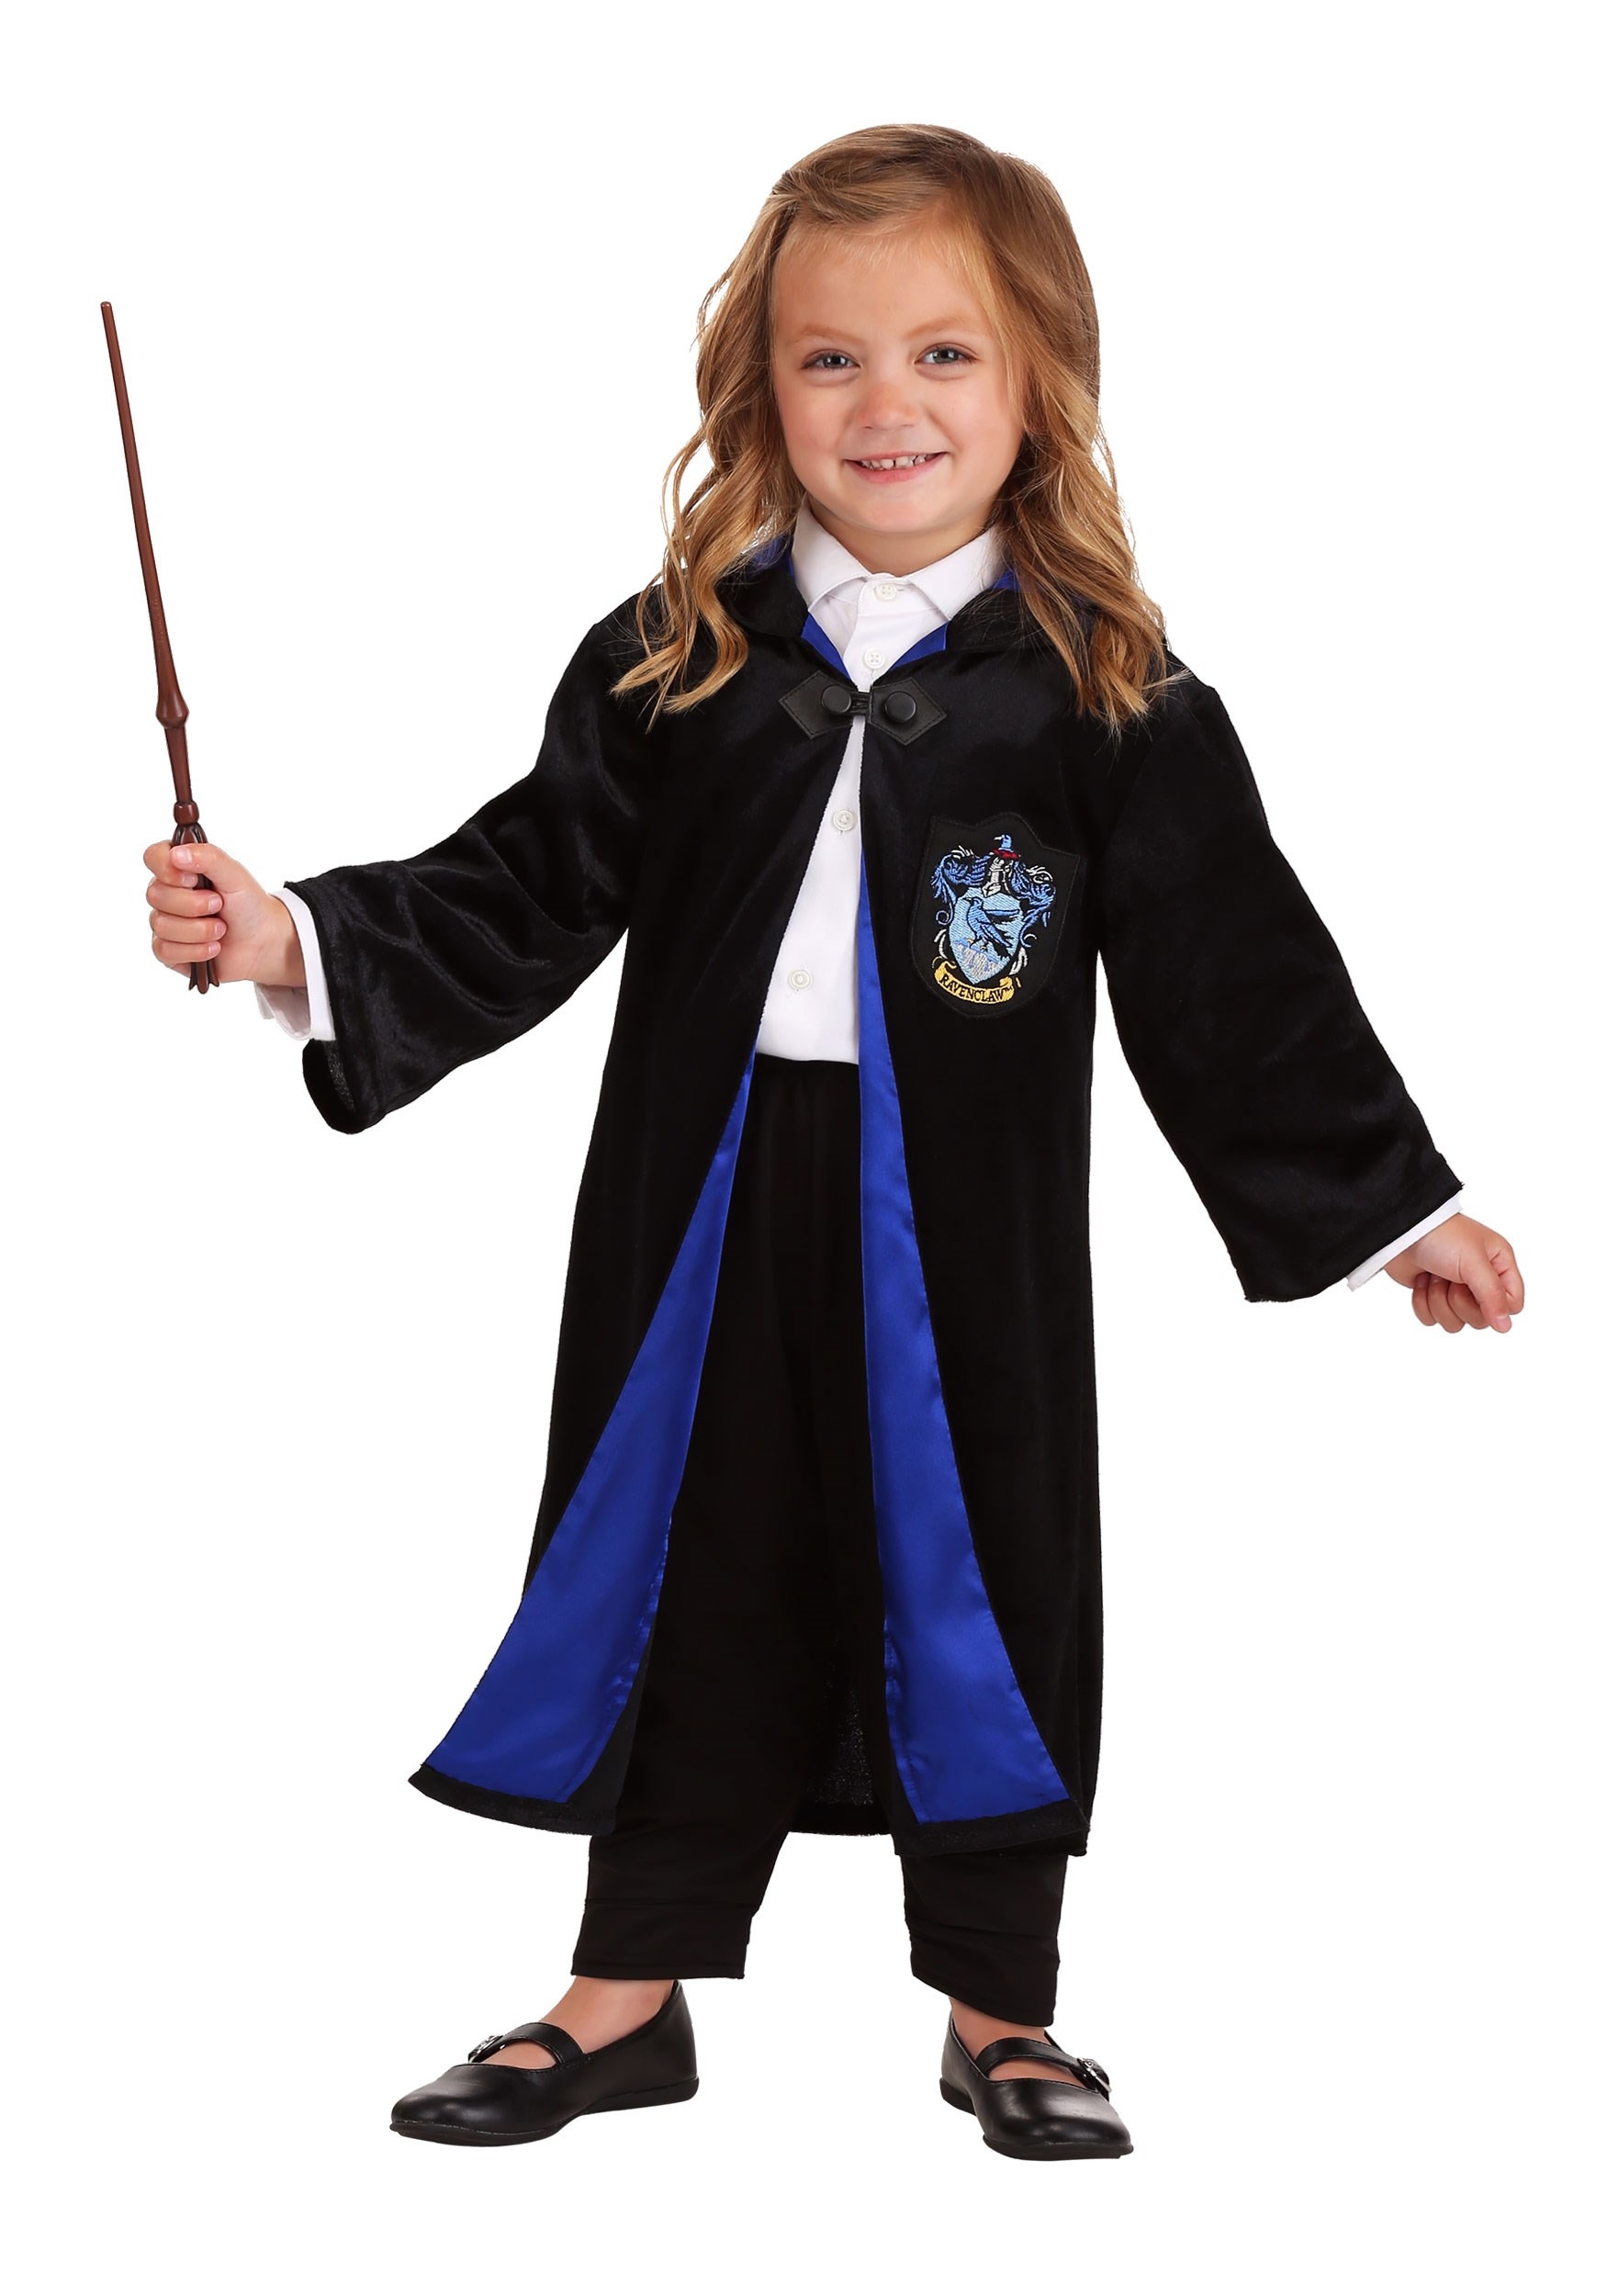 Harry Potter Hogwarts House Ravenclaw Printed Top Child Costume